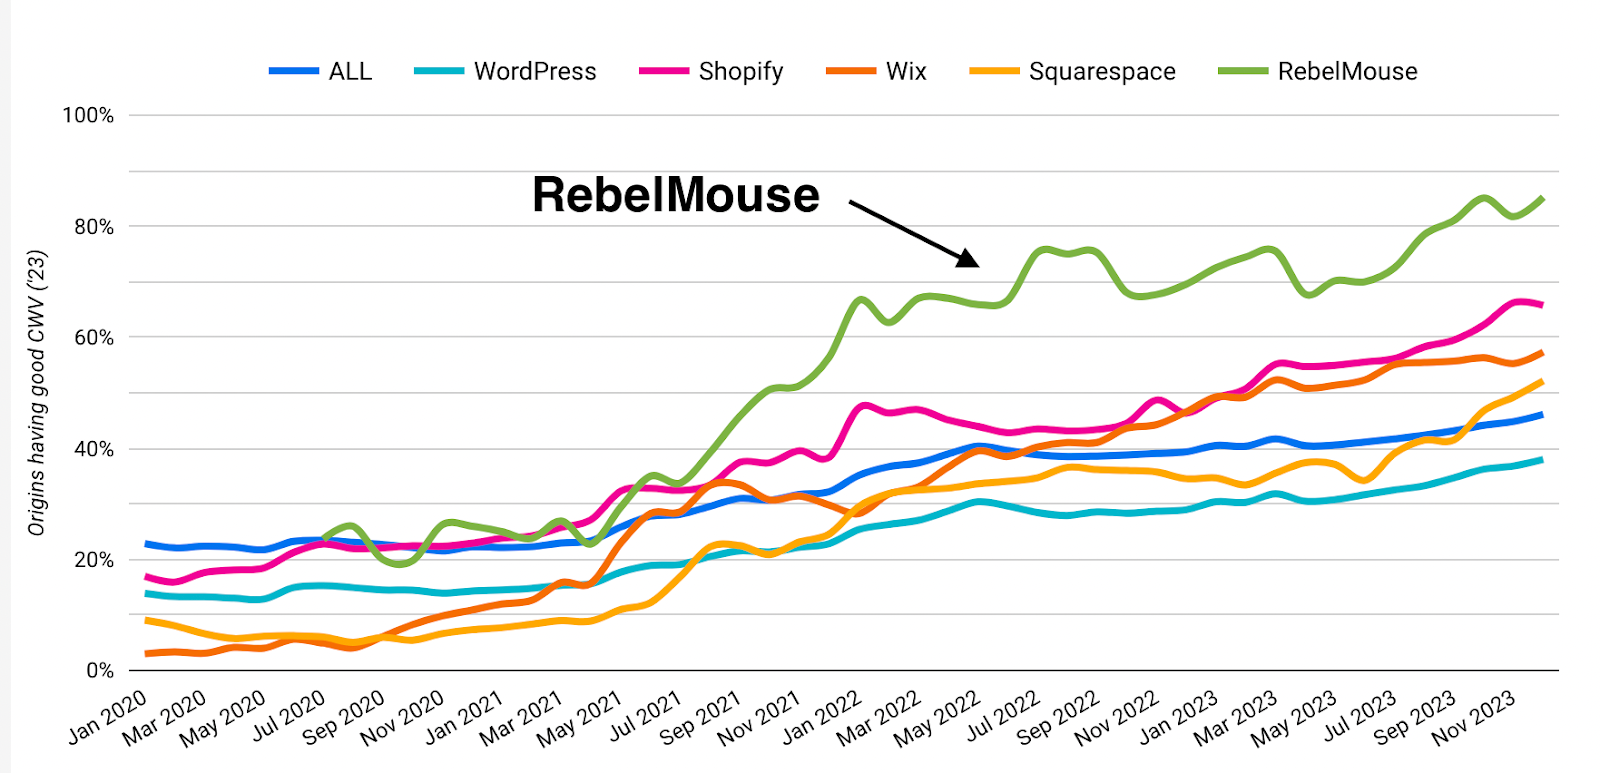  Core Web Vitals Report: RebelMouse with a green uptrend outperforms competitor CMS platforms